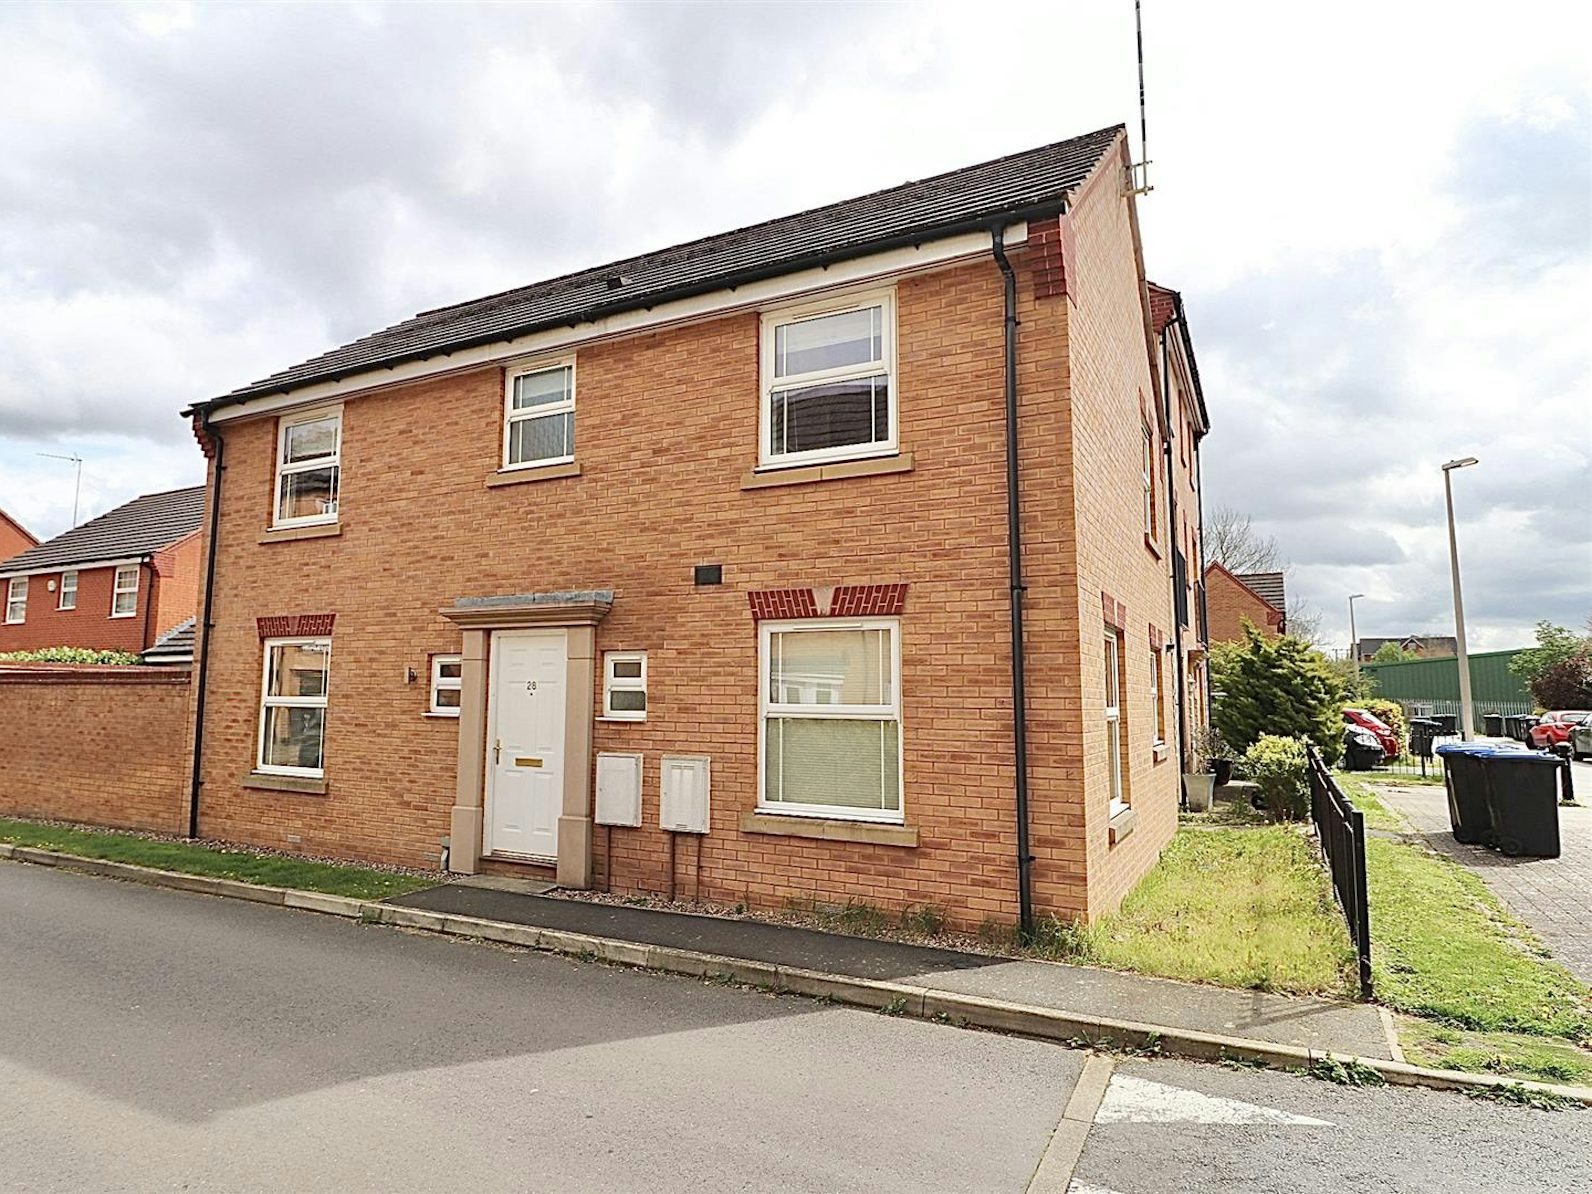 Detached house for sale on Oulton Road Rugby, CV21